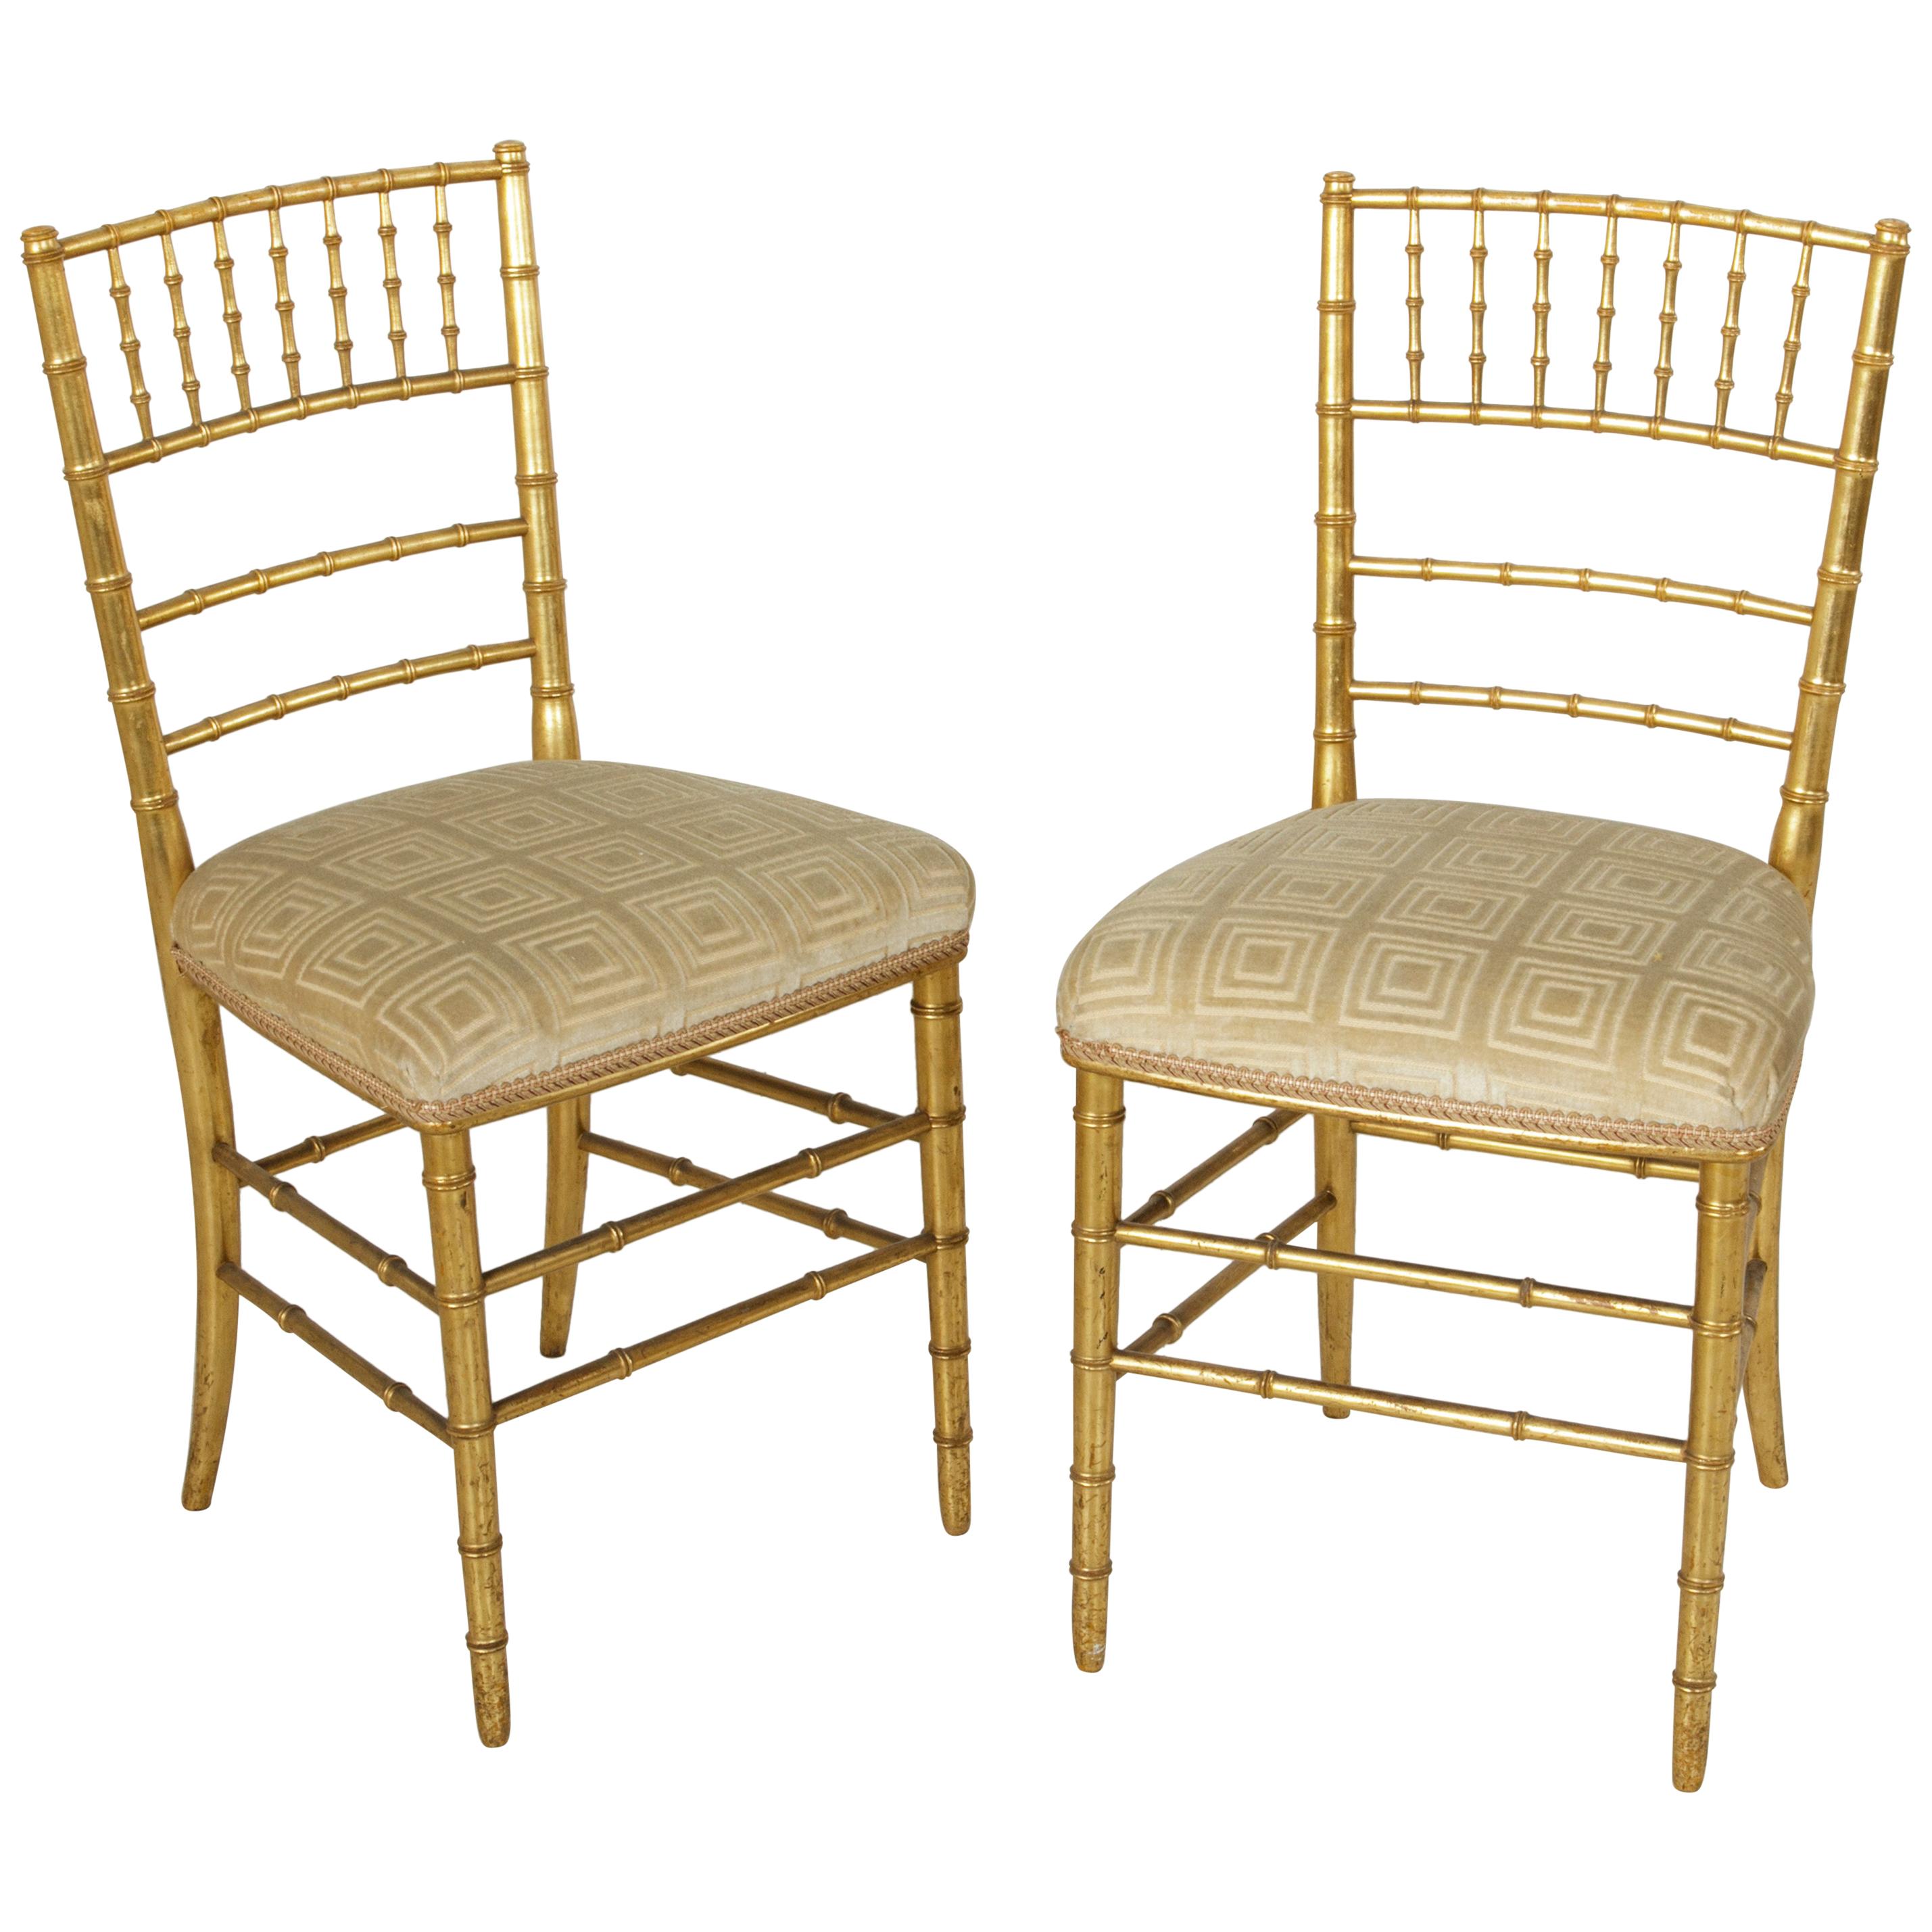 Pair of French Giltwood Faux Bamboo Opera Chairs, Side Chairs, circa 1900